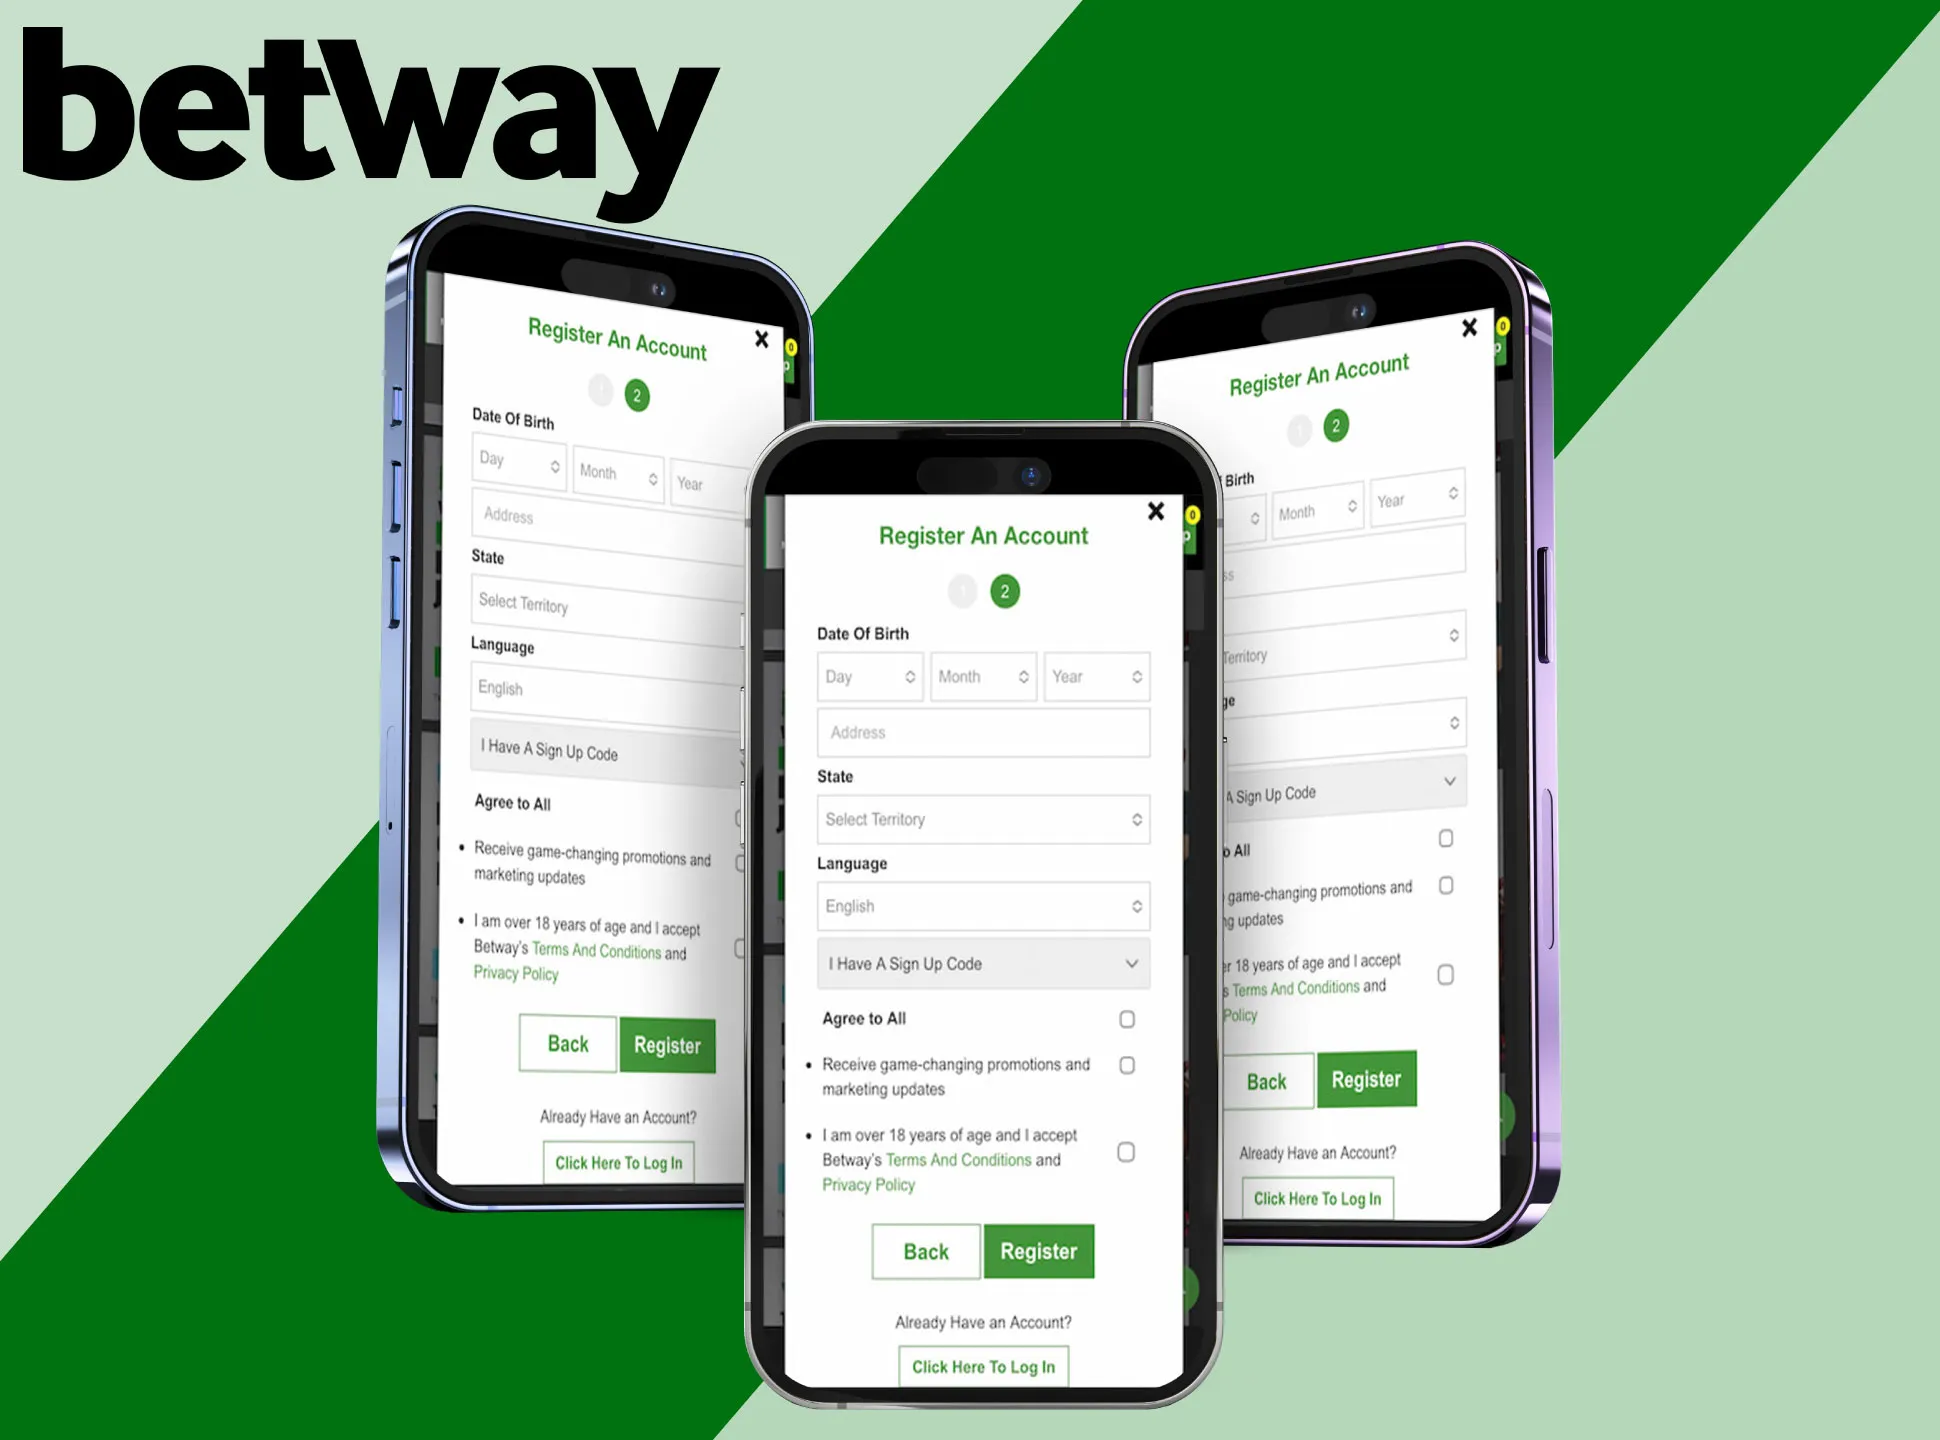 Go to the Betway mobile app and sign up for the sportsbook.